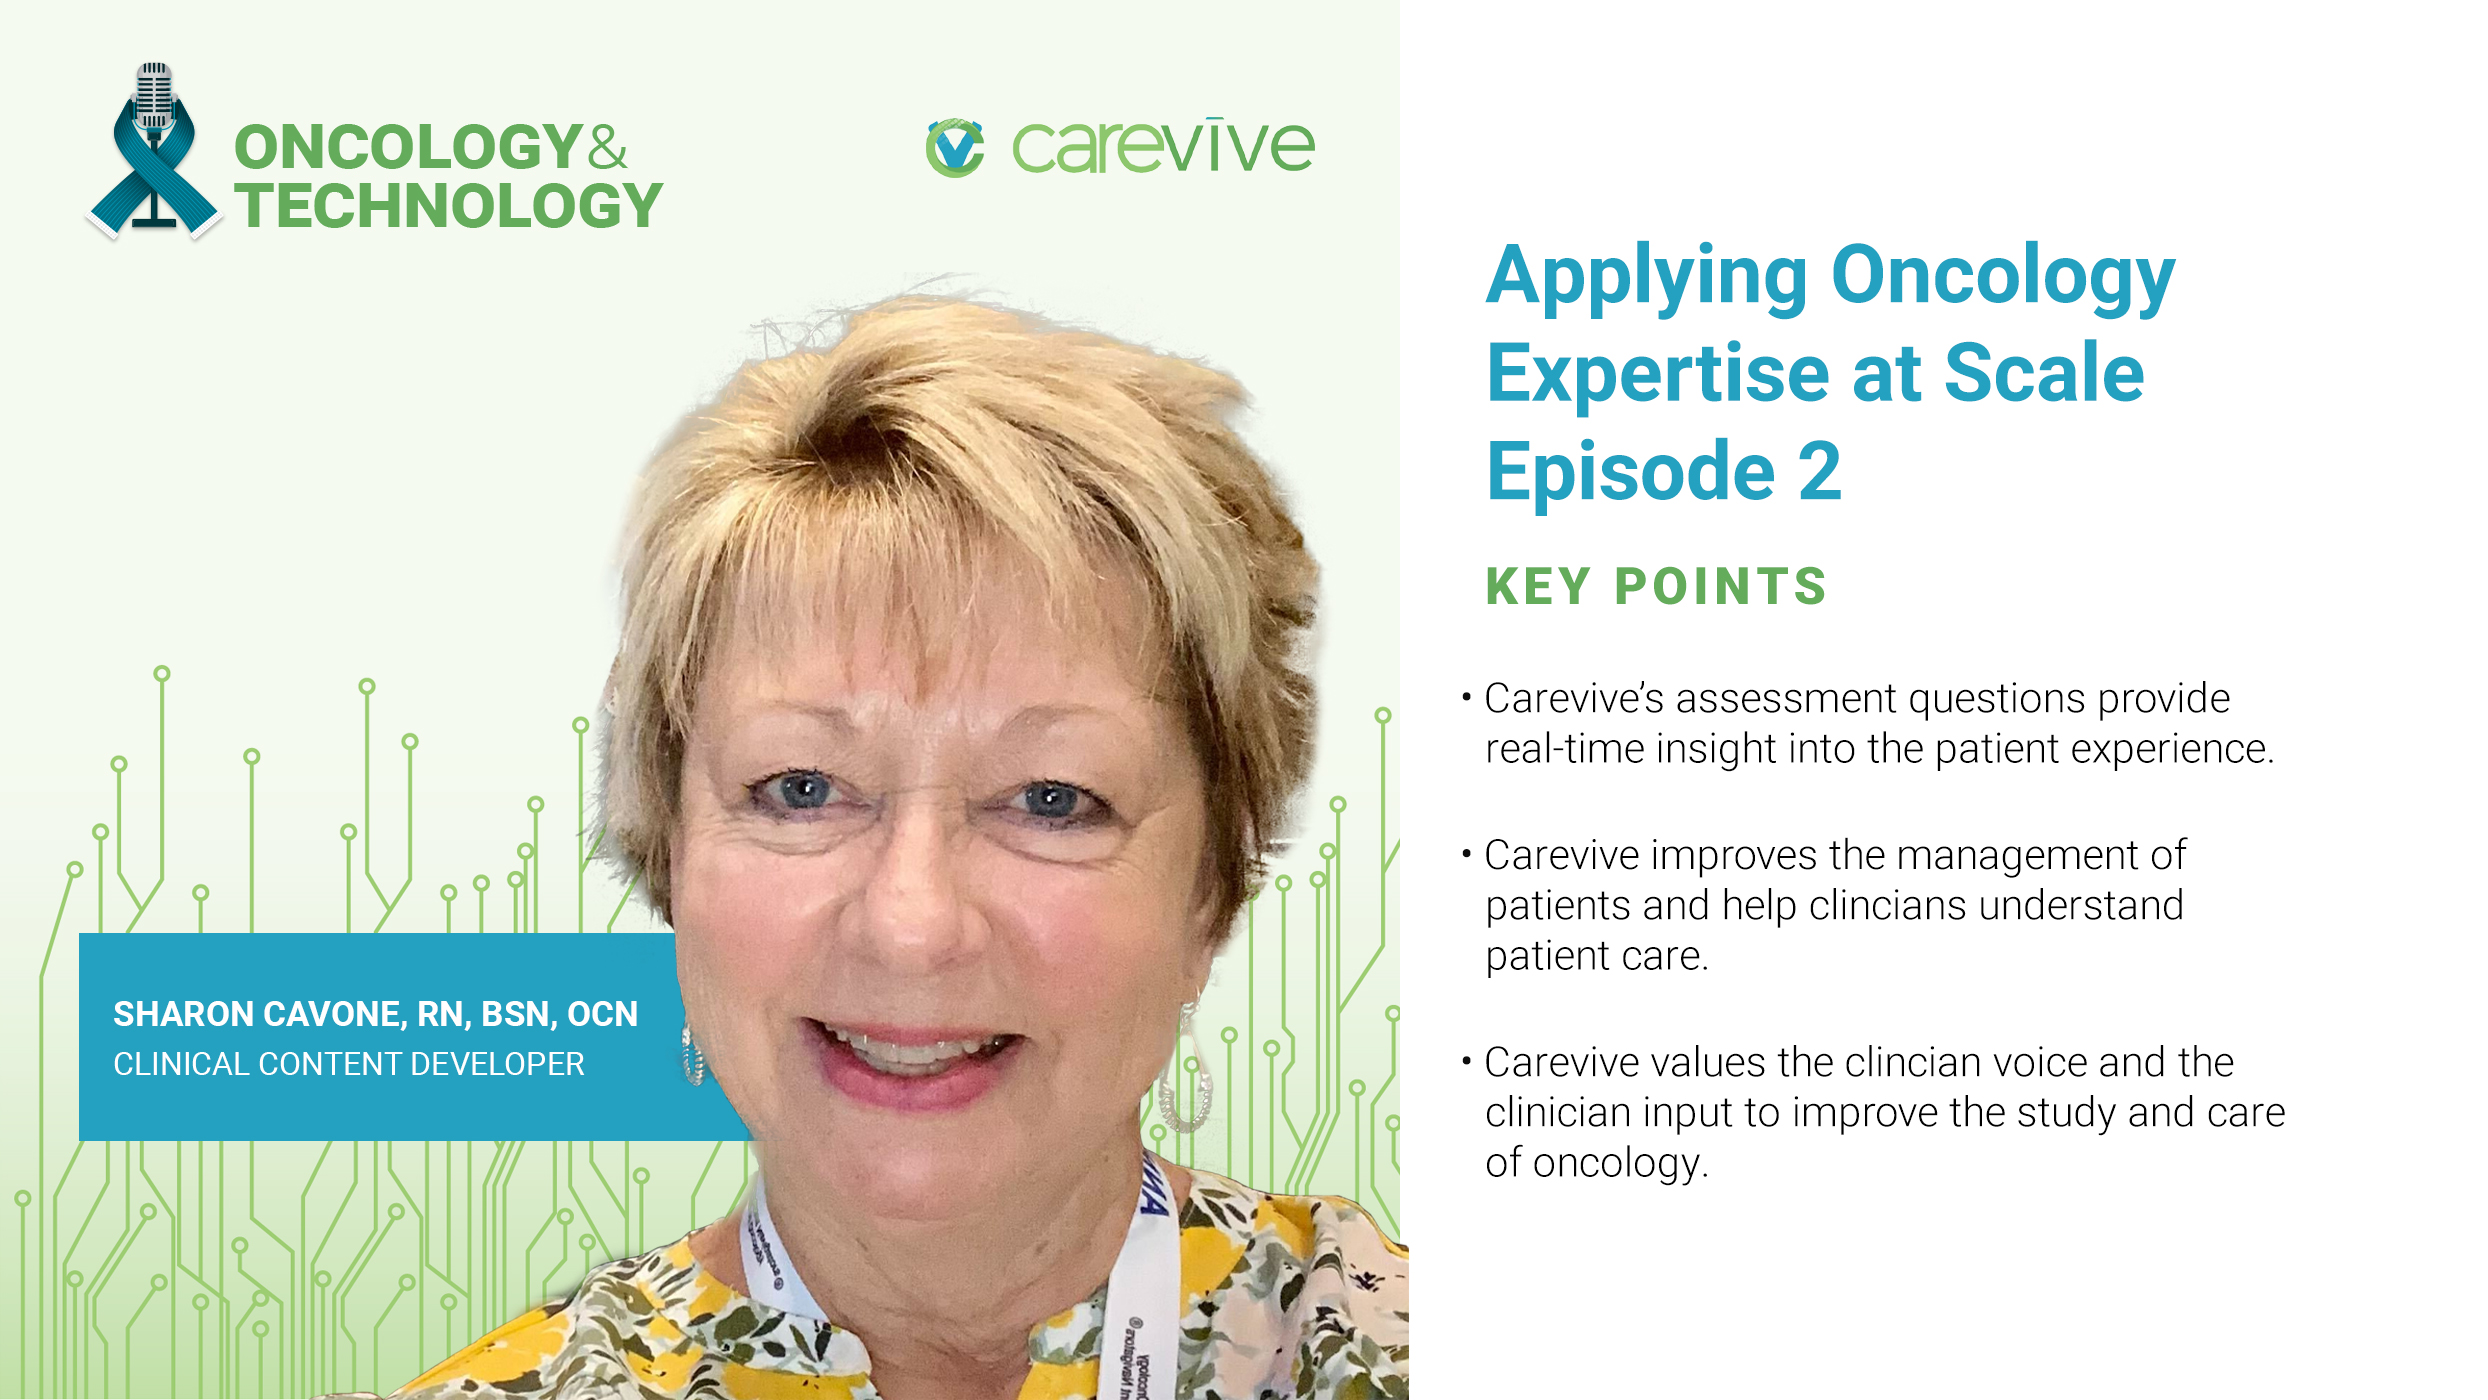 Podcast #14: Applying Oncology Expertise at Scale - Part 2 - Sharon Cavone